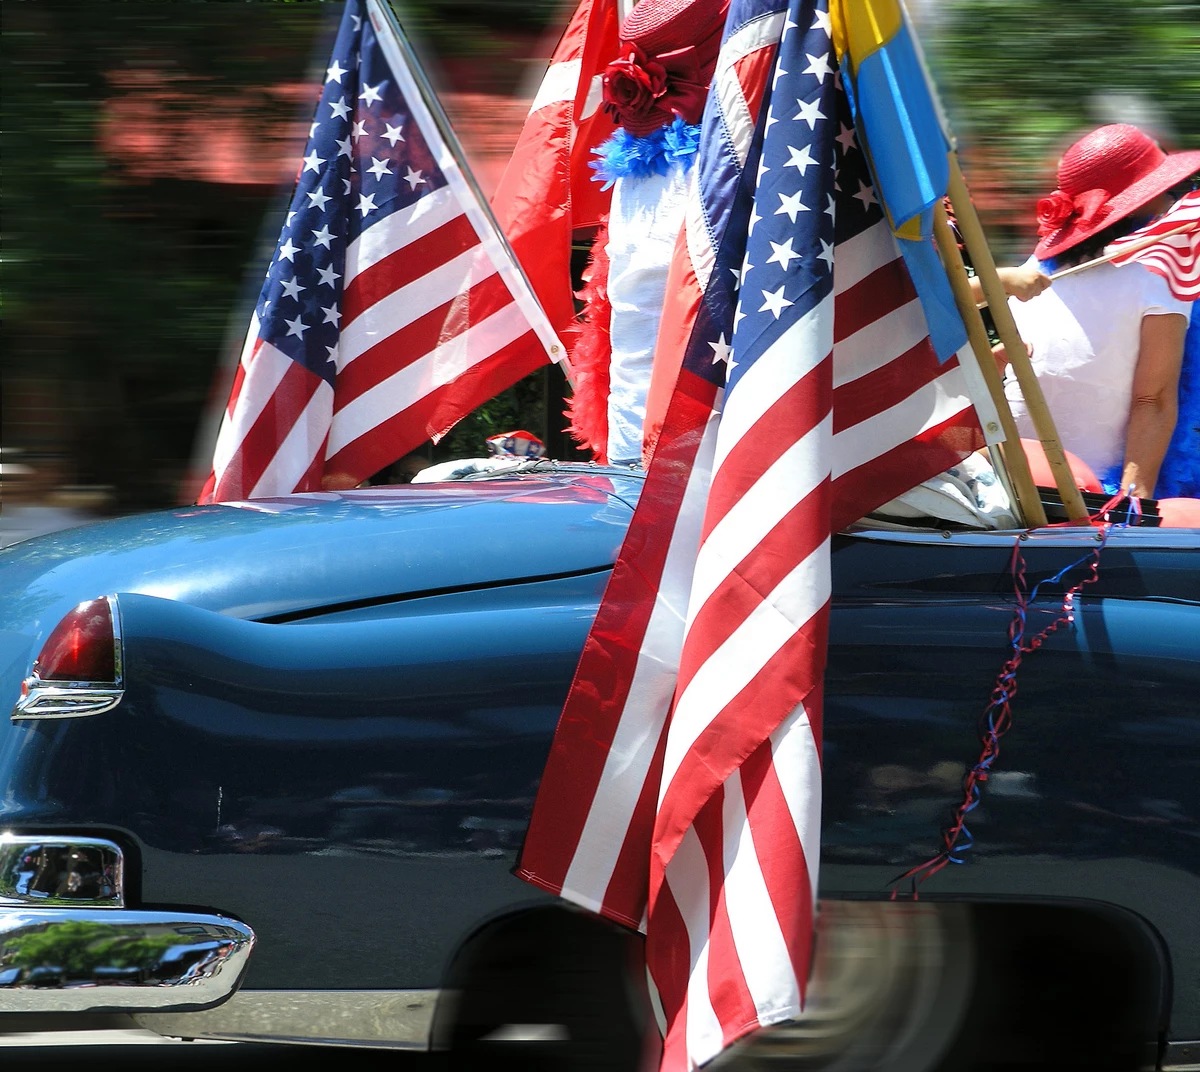 5 Things to Know About Grand Junction's 4th of July Parade